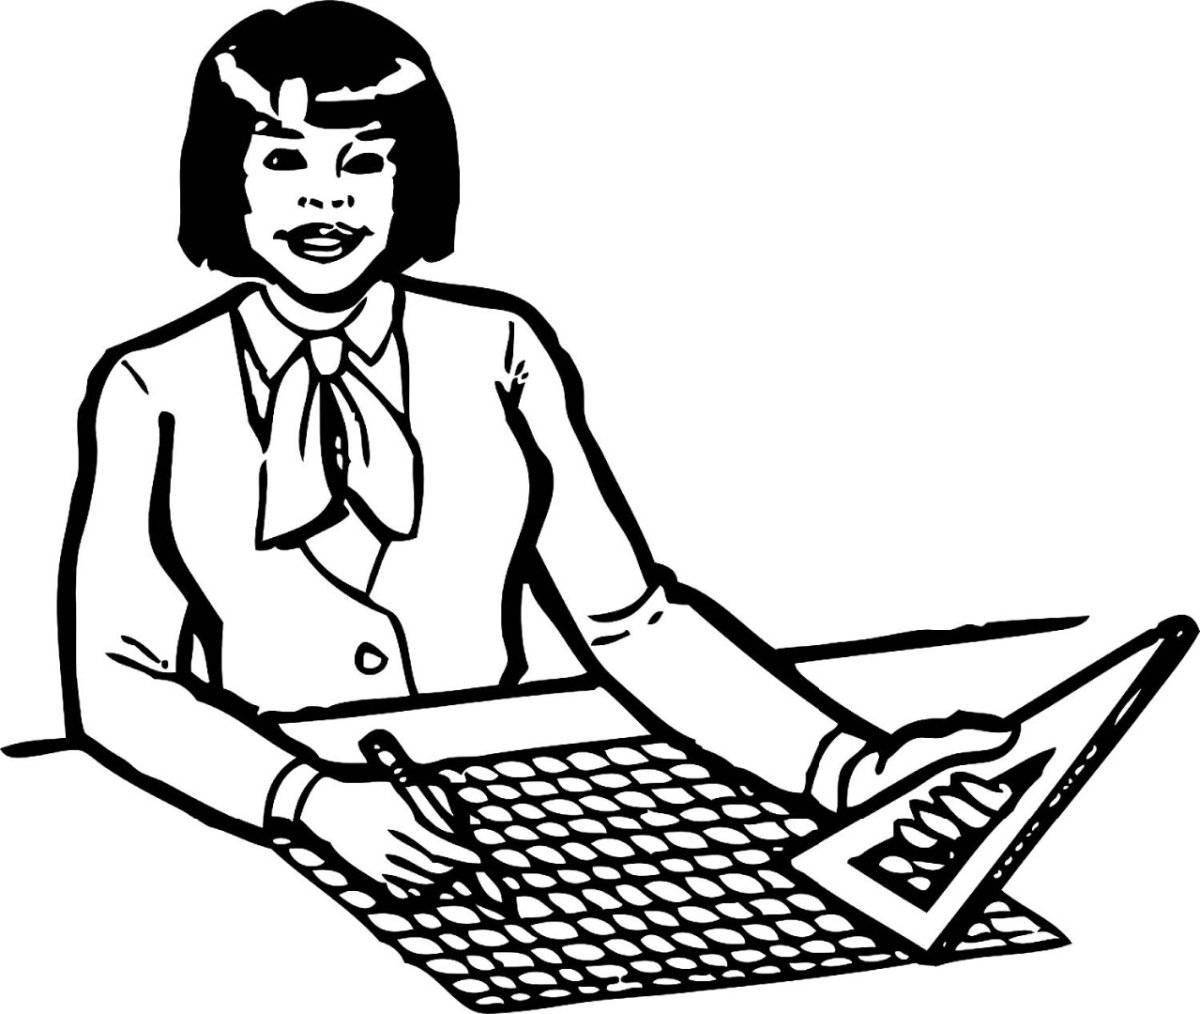 Bright accountant coloring page